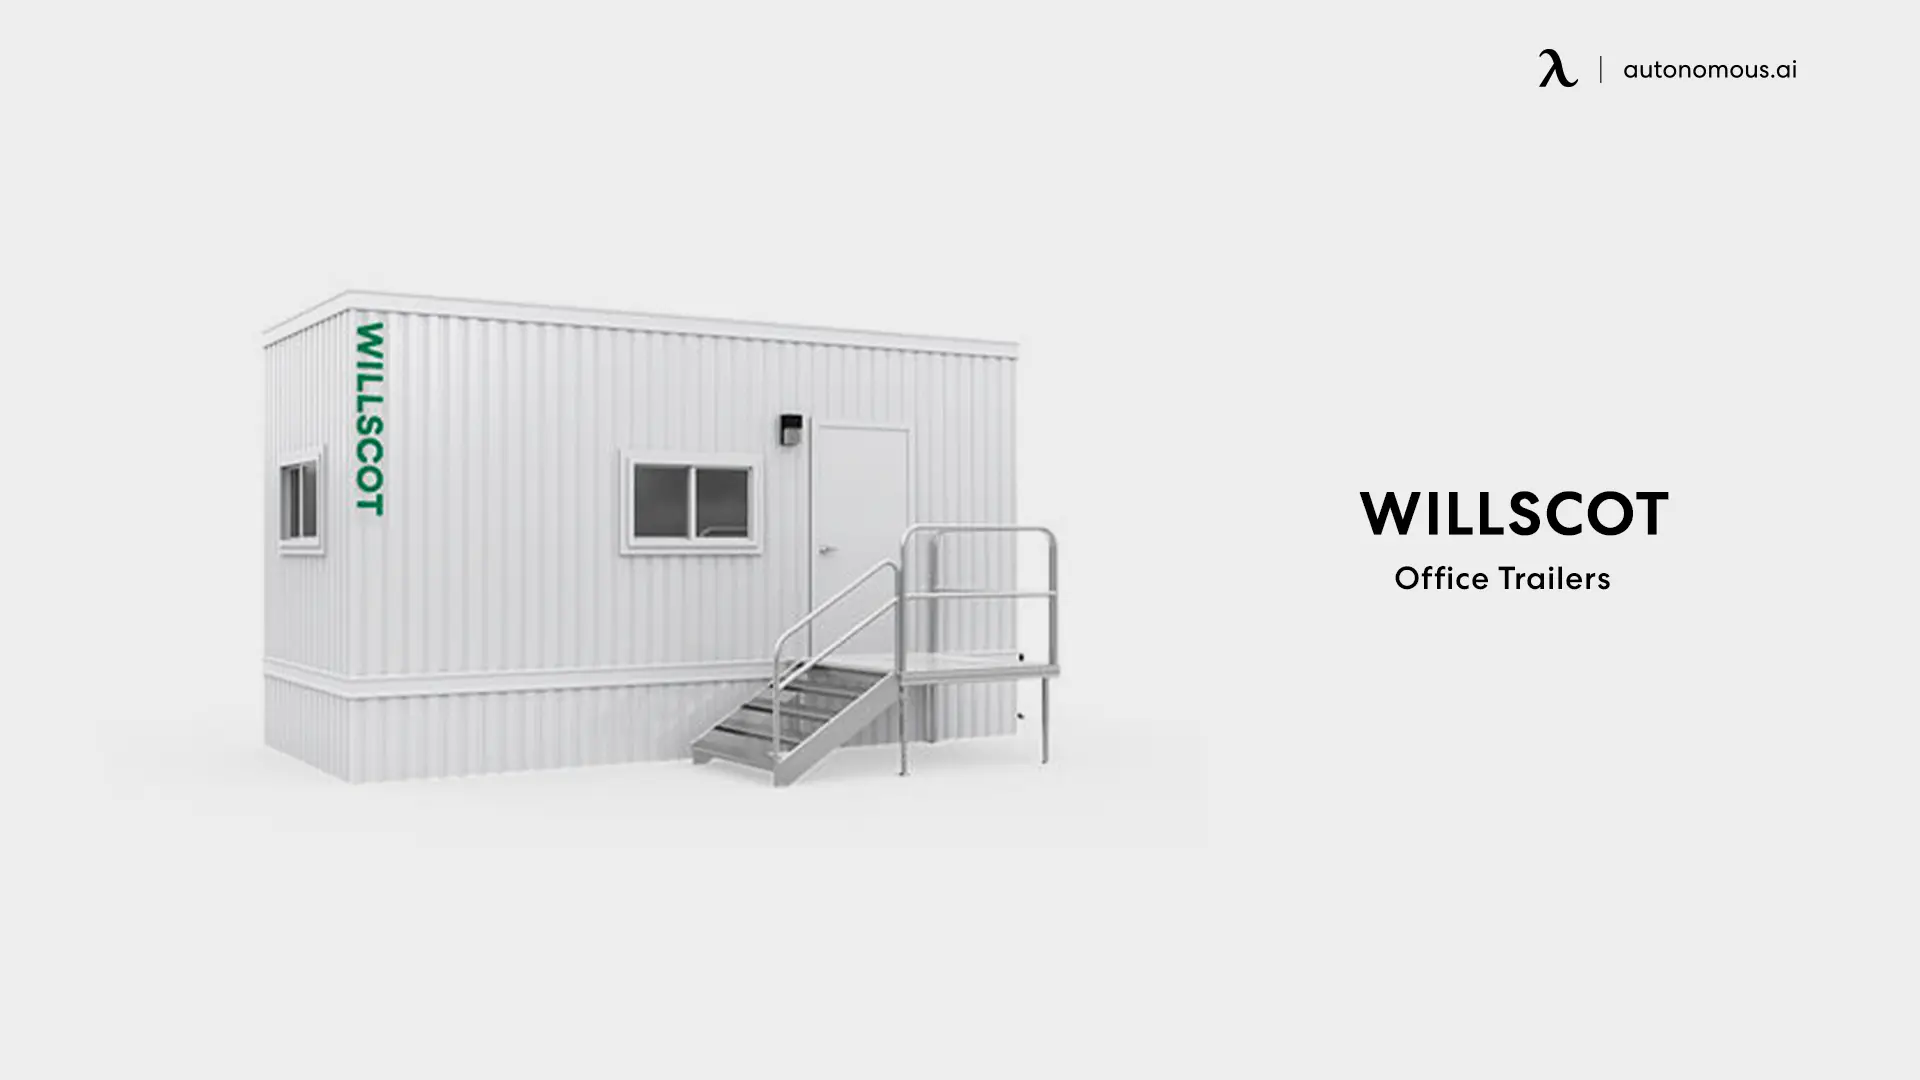 Willscot Office Trailers mobile office trailer